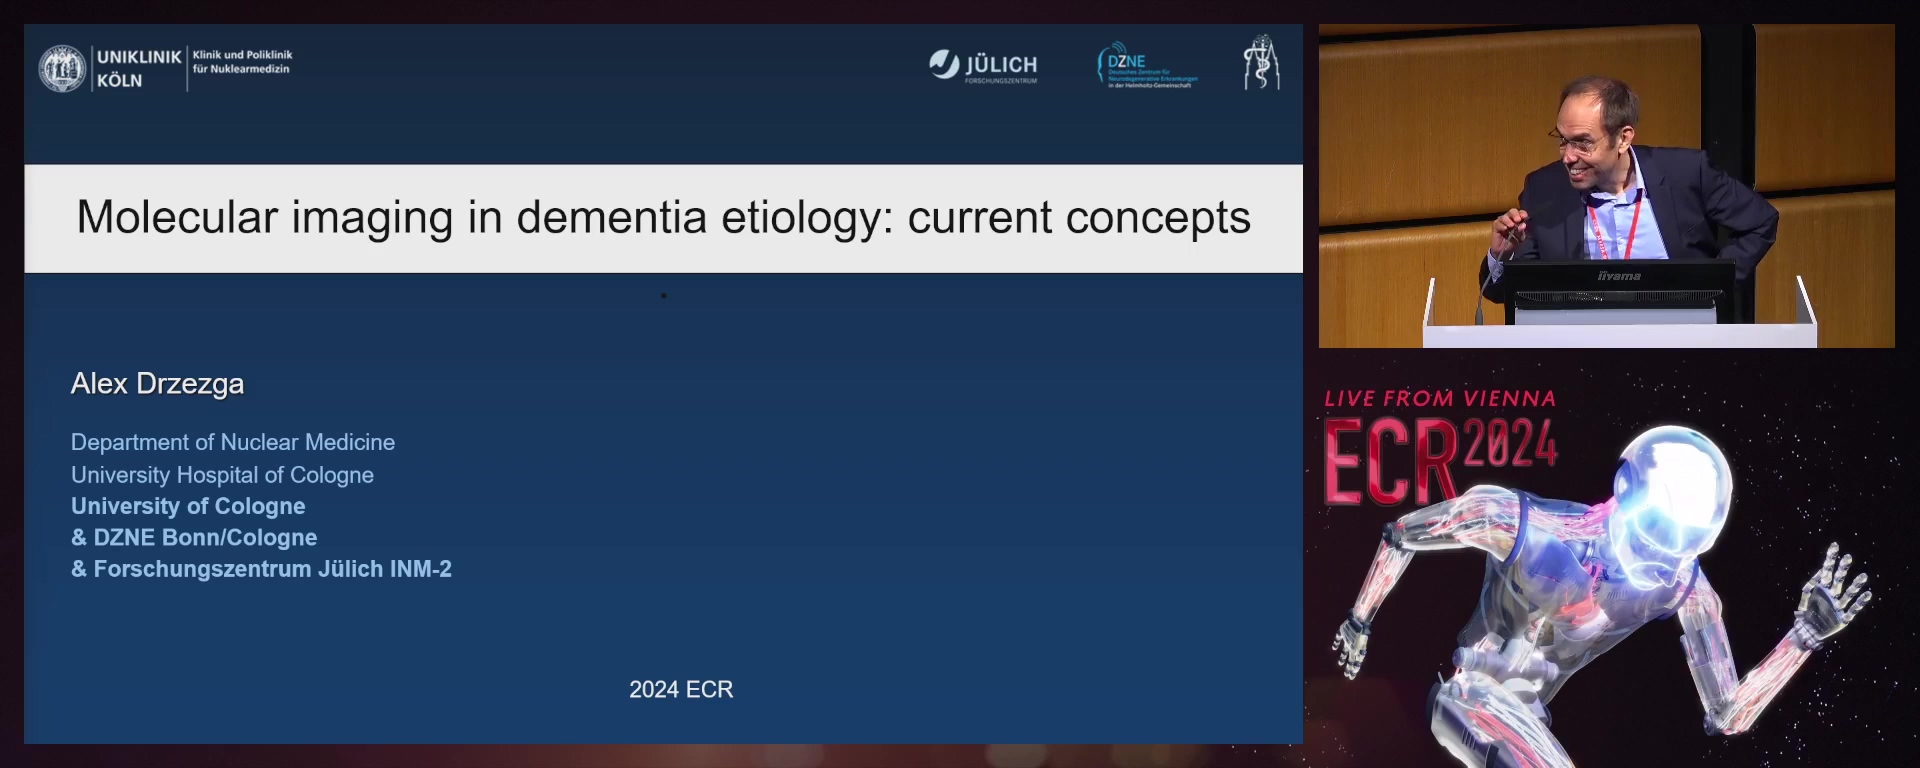 Molecular imaging in dementia aetiology: current concepts